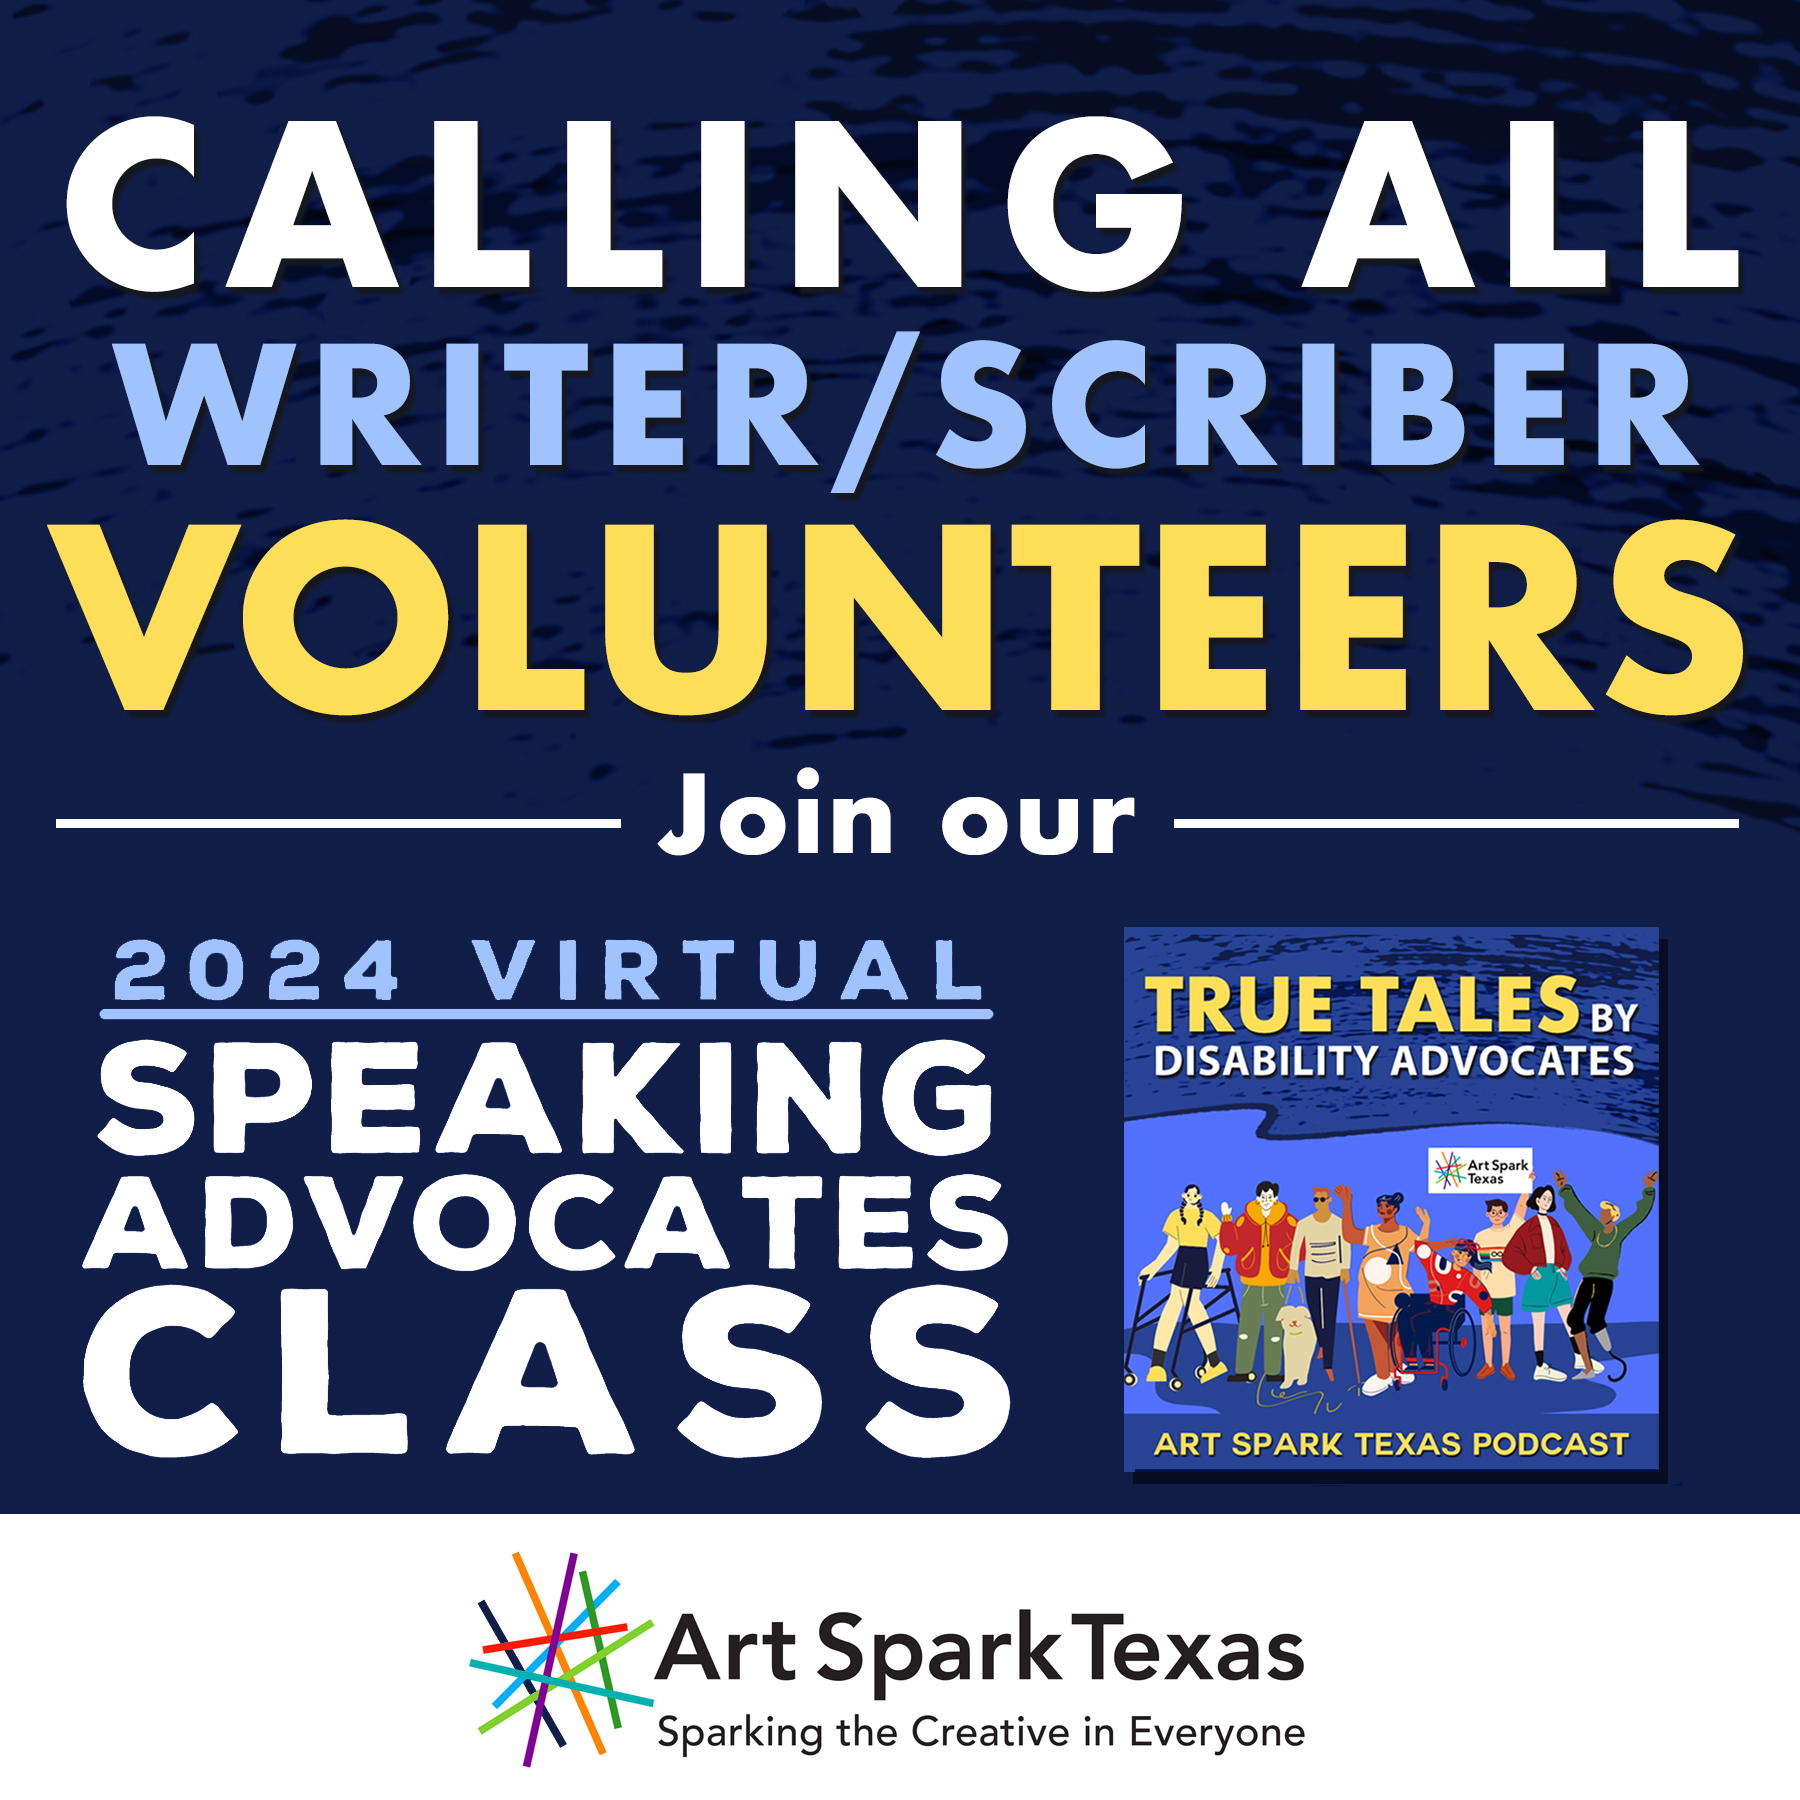 Calling all writer/scriber volunteers! Join our 2024 virtual Speaking Advocates class.